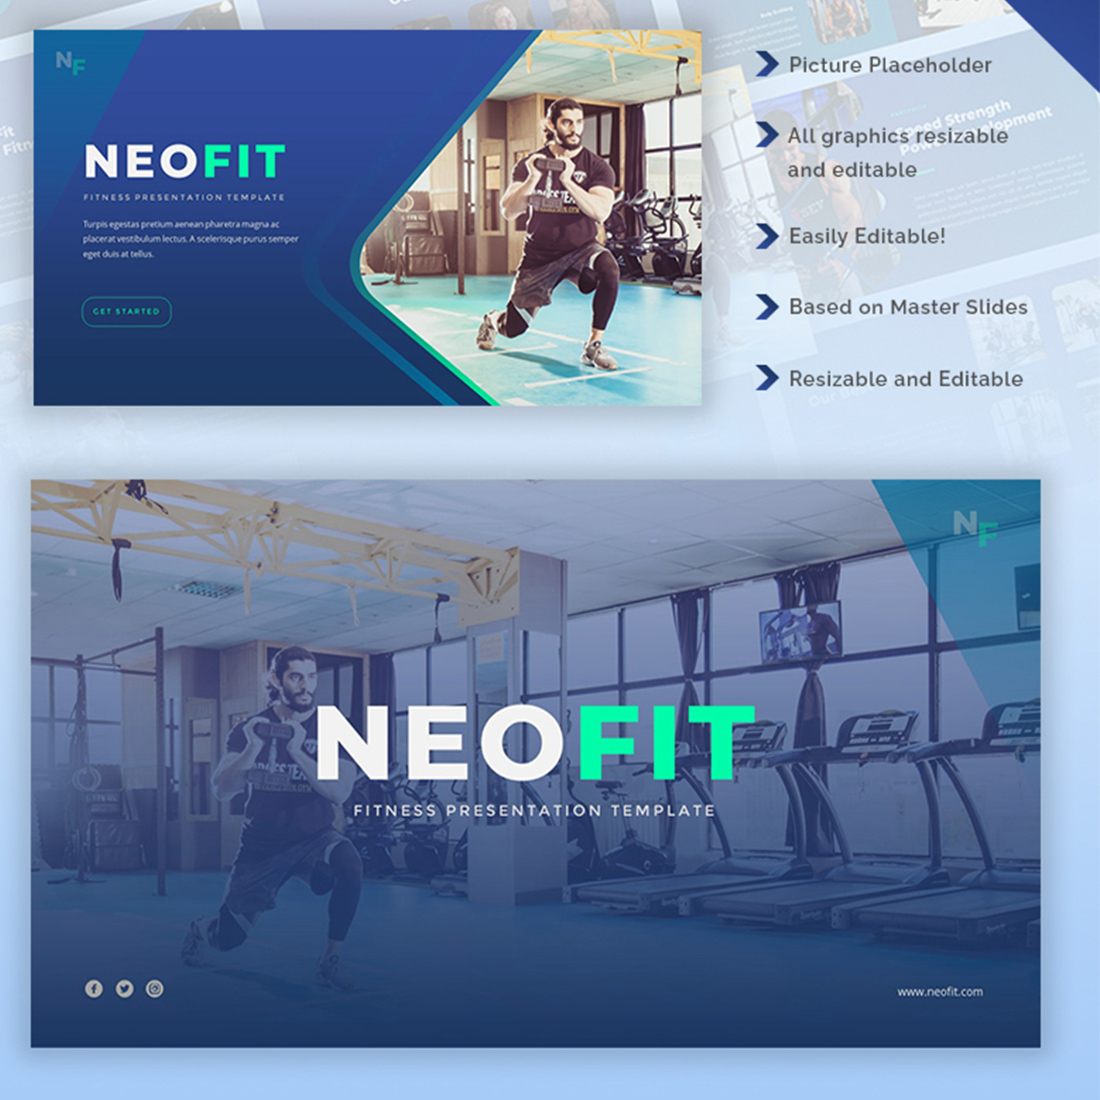 NeoFit-Fitness Google Slides Template preview image.